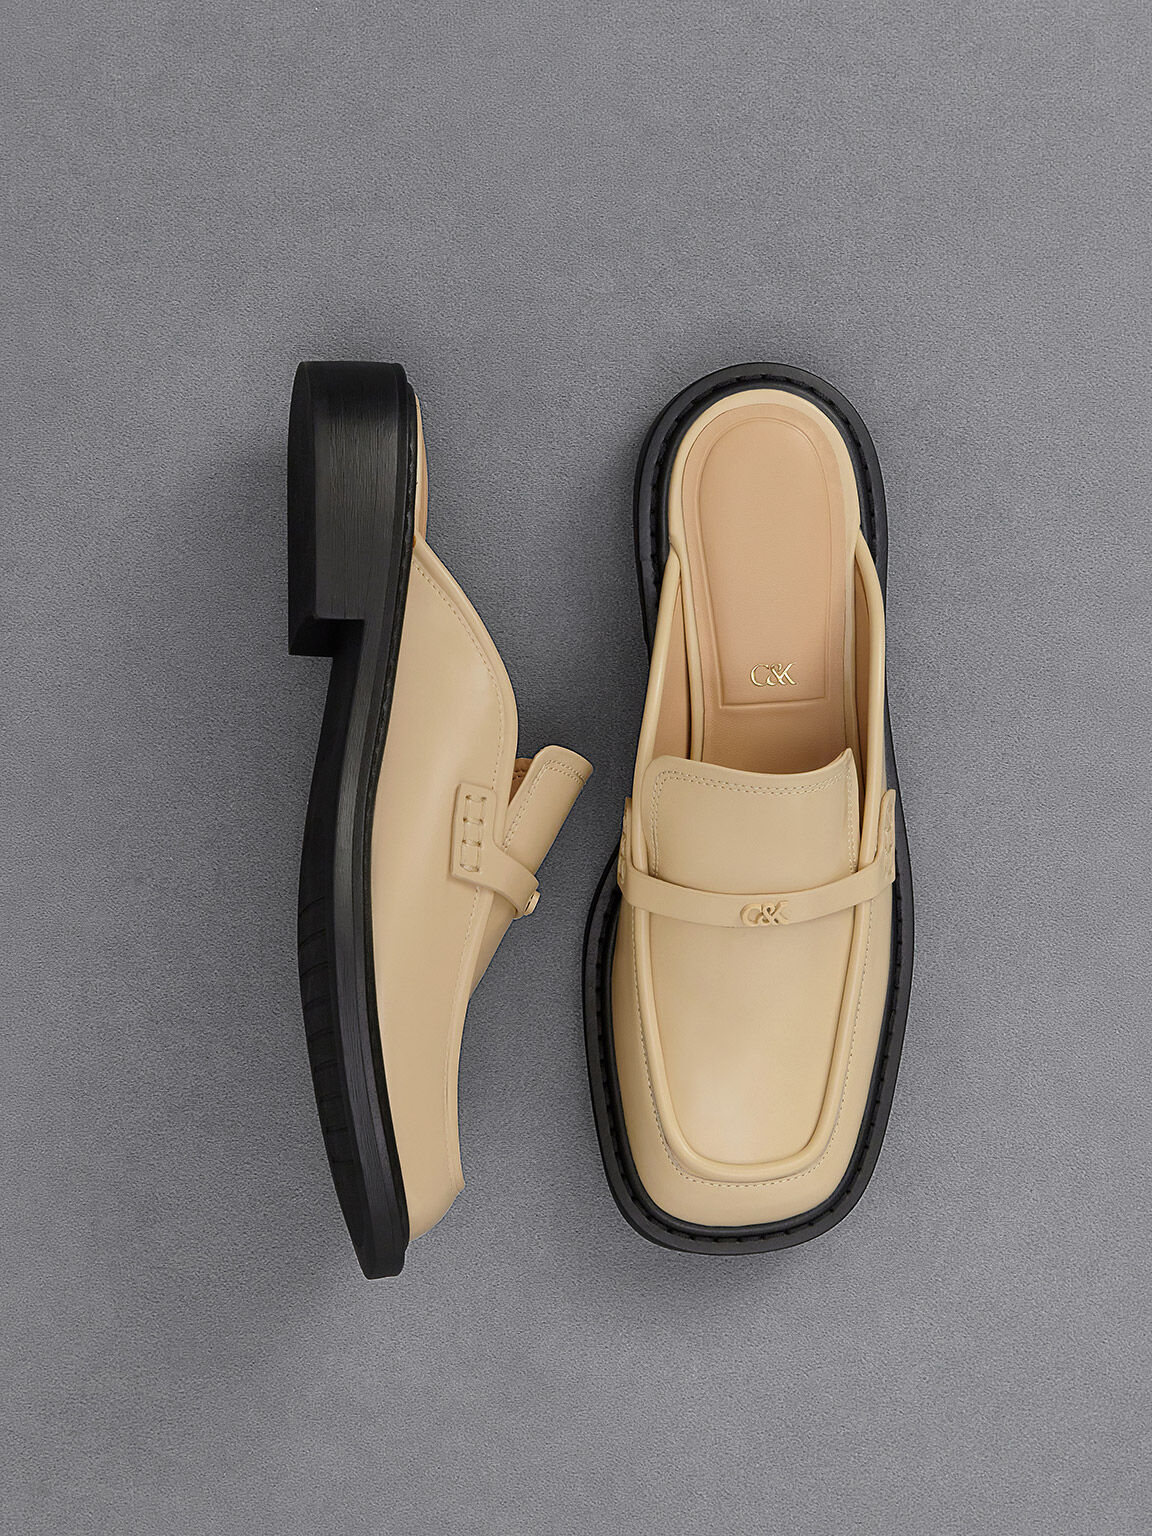 Women’s Thalia leather loafer mules in beige - CHARLES & KEITH